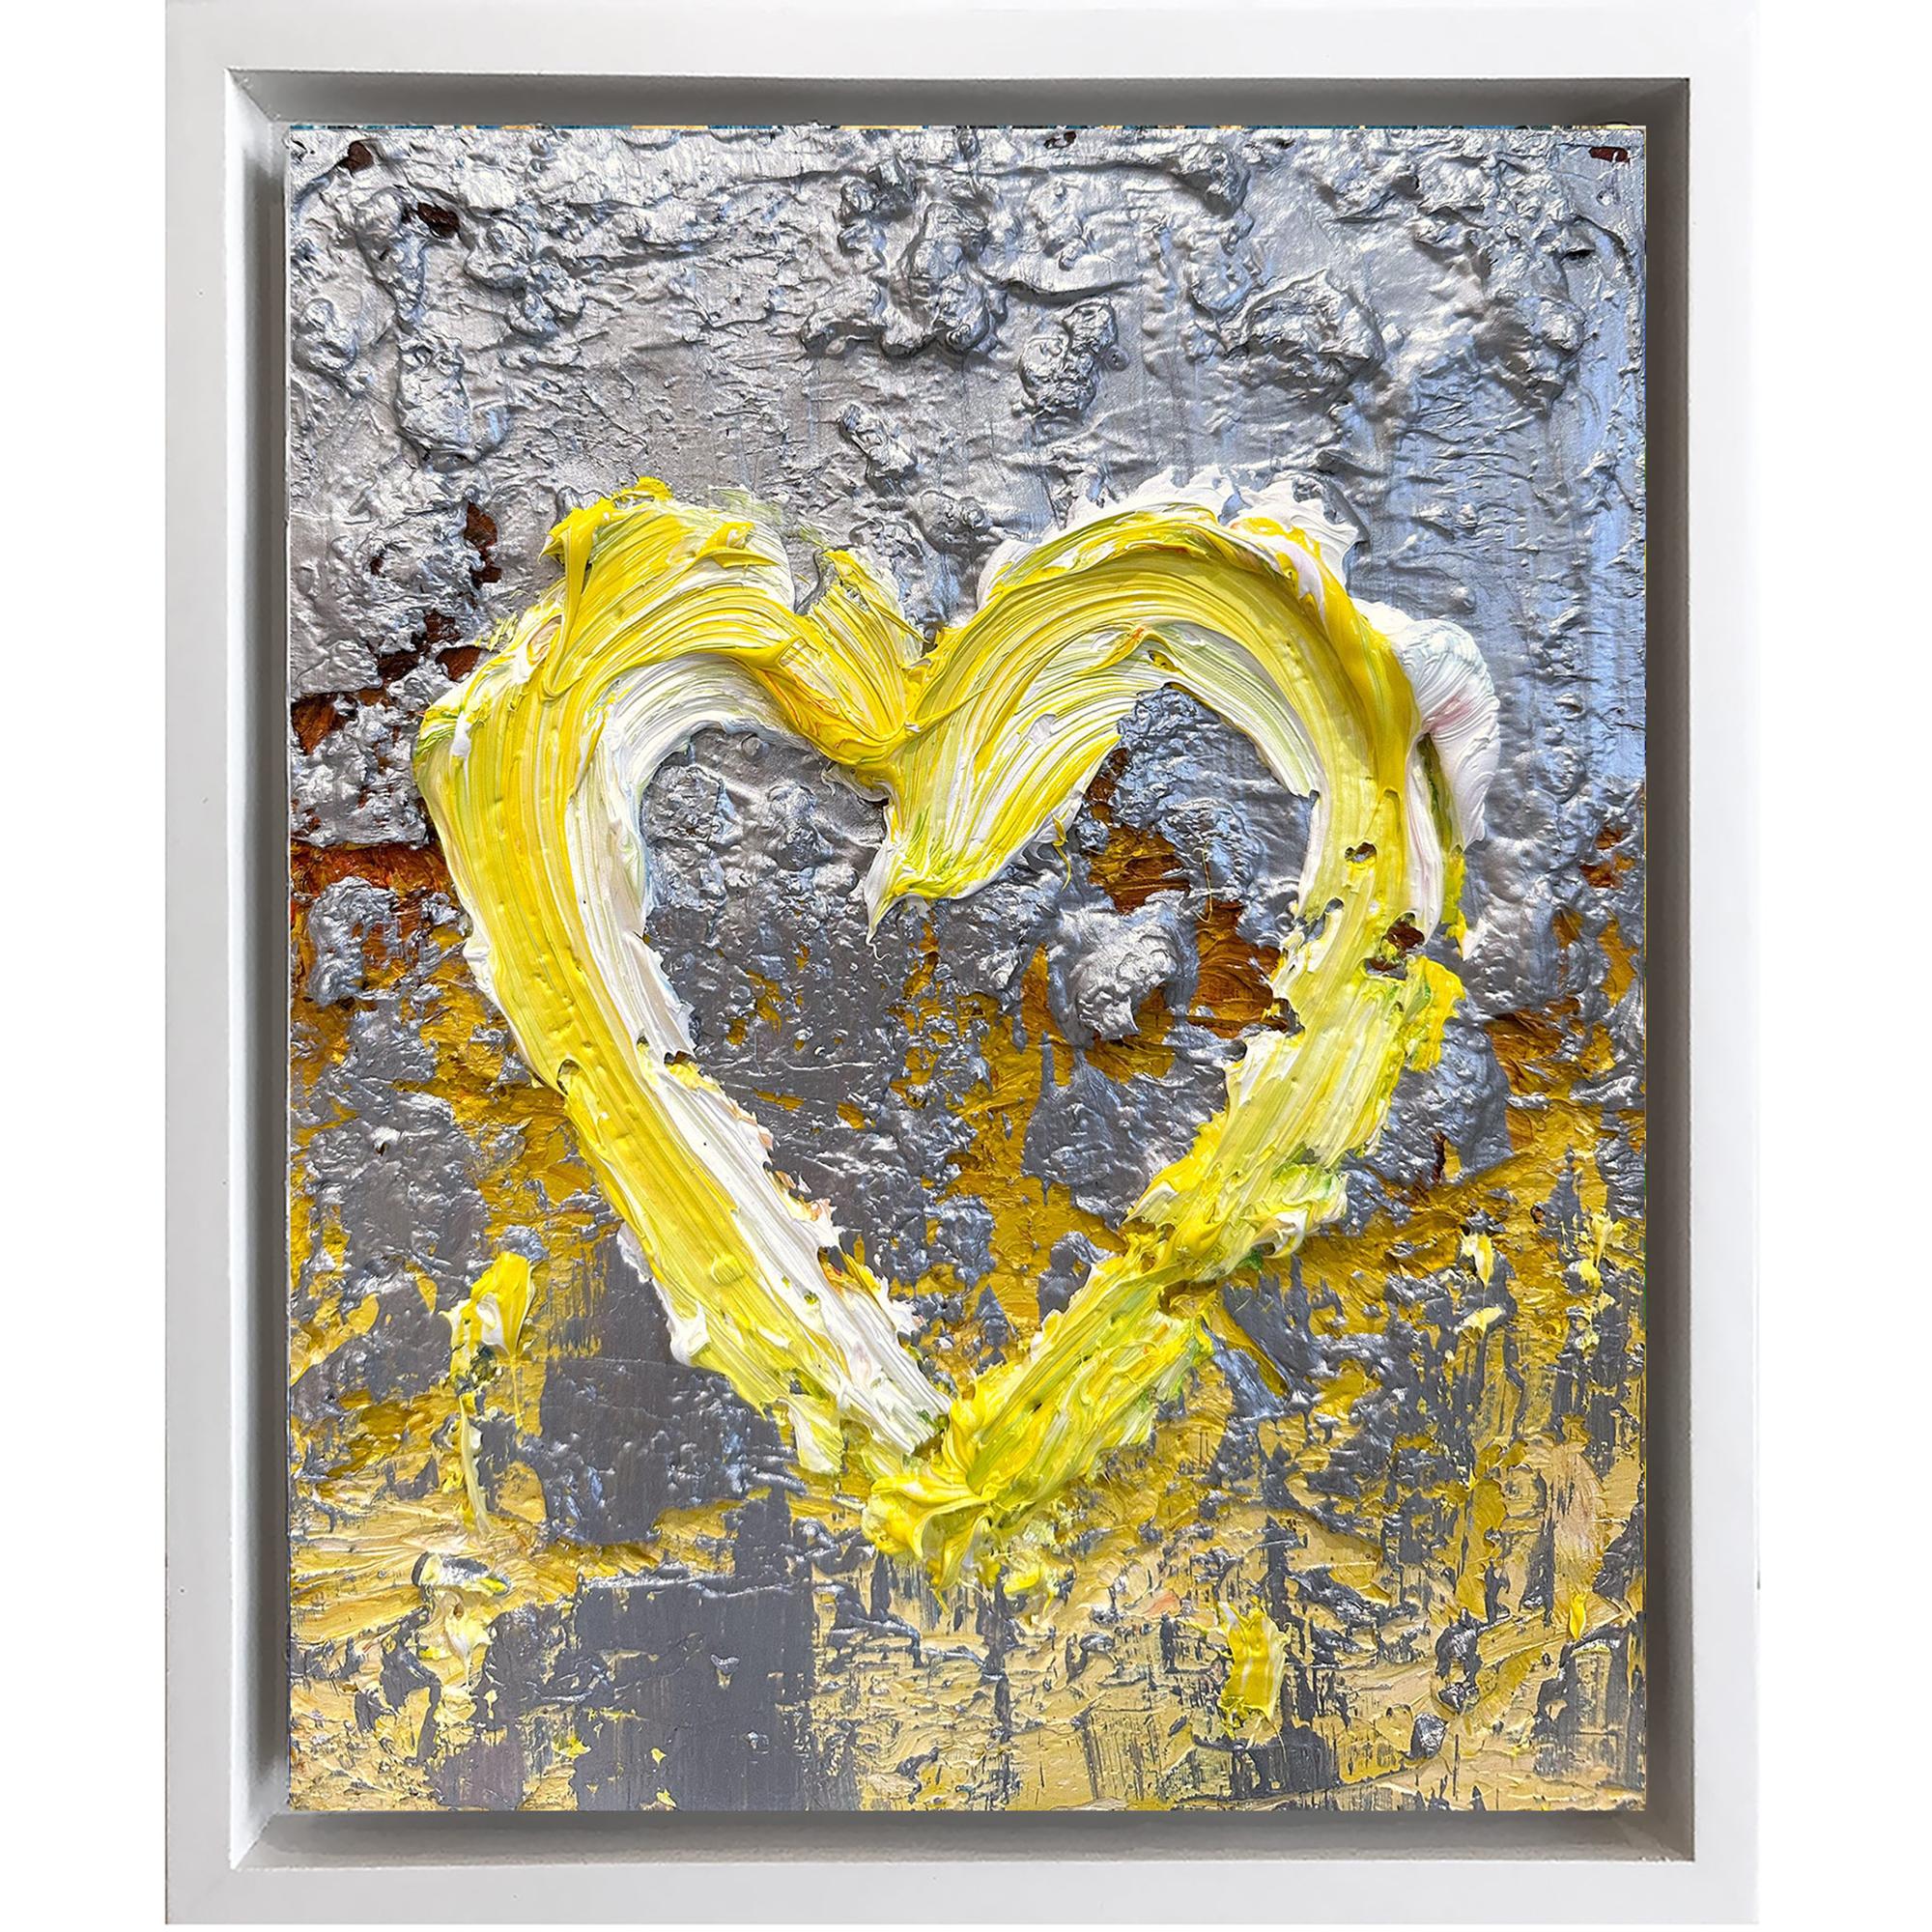 Cindy Shaoul Abstract Painting - "My Yves Saint Laurent Heart" Contemporary Oil Painting Wood White Floater Frame